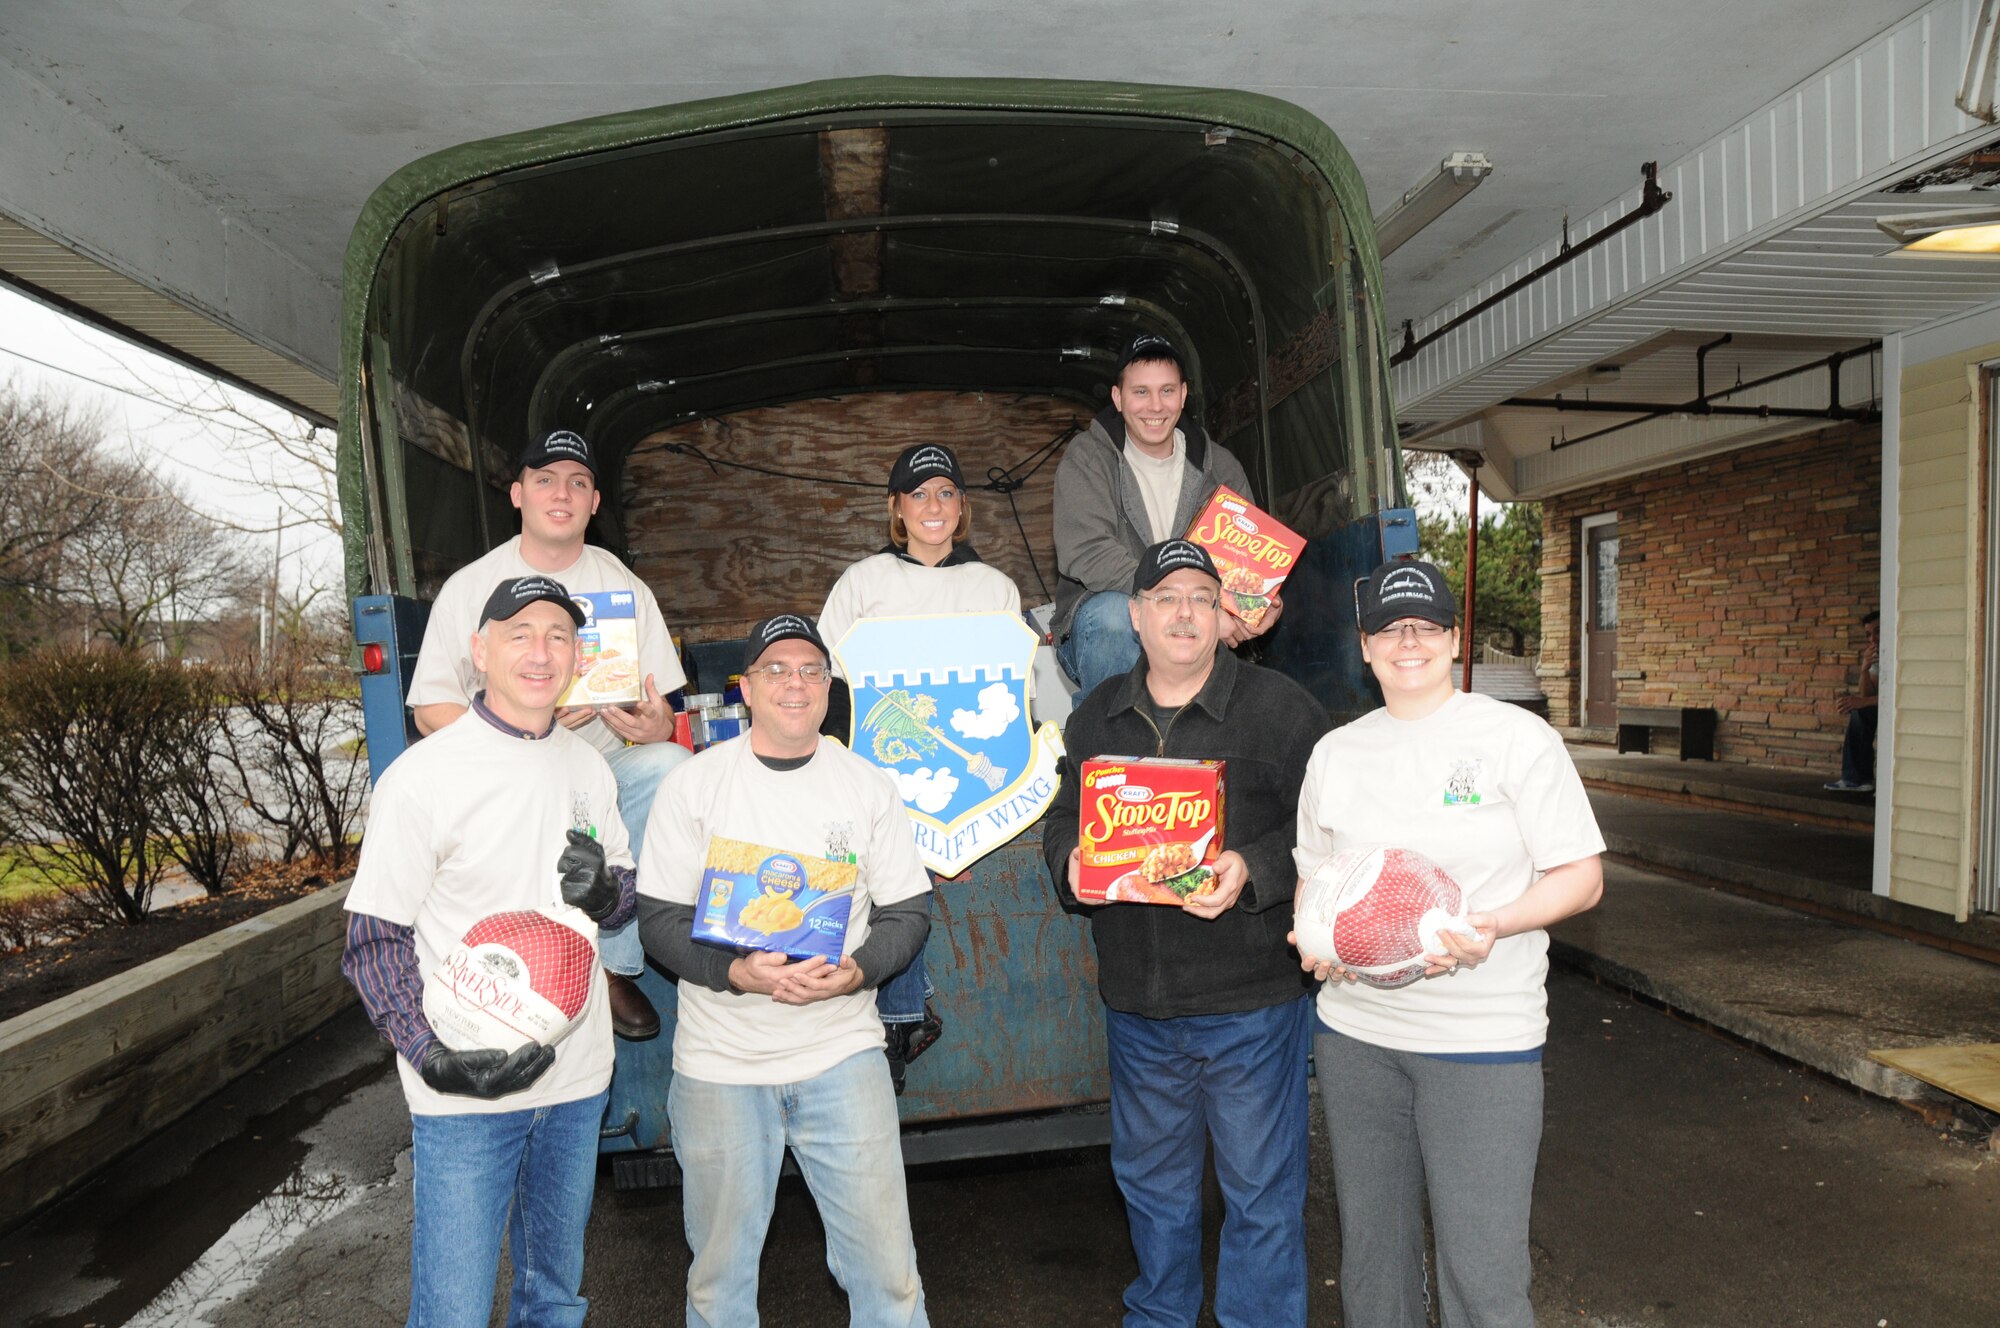 Airmen from the 107th Airlift Wing along with mission staff unloaded boxes of food, canned goods and frozen turkeys stocking up the food pantry at the Niagara Falls Community Mission. Front row; Master Sgt. Steven Buja, Tech. Sgt. Paul Wiegand, Master Sgt. Mark Lewandowski, Tech. Sgt. Amanda Doherty. Back row; Senior Airman Robert Kurzdorfer, Tech. Sgt. Krystatore Stegner and Airman 1st Class Tony Lewandowski. Front row; Master Sgt. Steven Buja, Tech. Sgt. Paul Wiegand, Master Sgt. Mark Lewandowski, Tech. Sgt. Amanda Doherty. Back row; Senior Airman Robert Kurzdorfer, Tech. Sgt. Krystatore Stegner and Airman 1st Class Tony Lewandowski. on December 21, 2011 (Air Force Photo/Senior Master Sgt Ray Lloyd)

